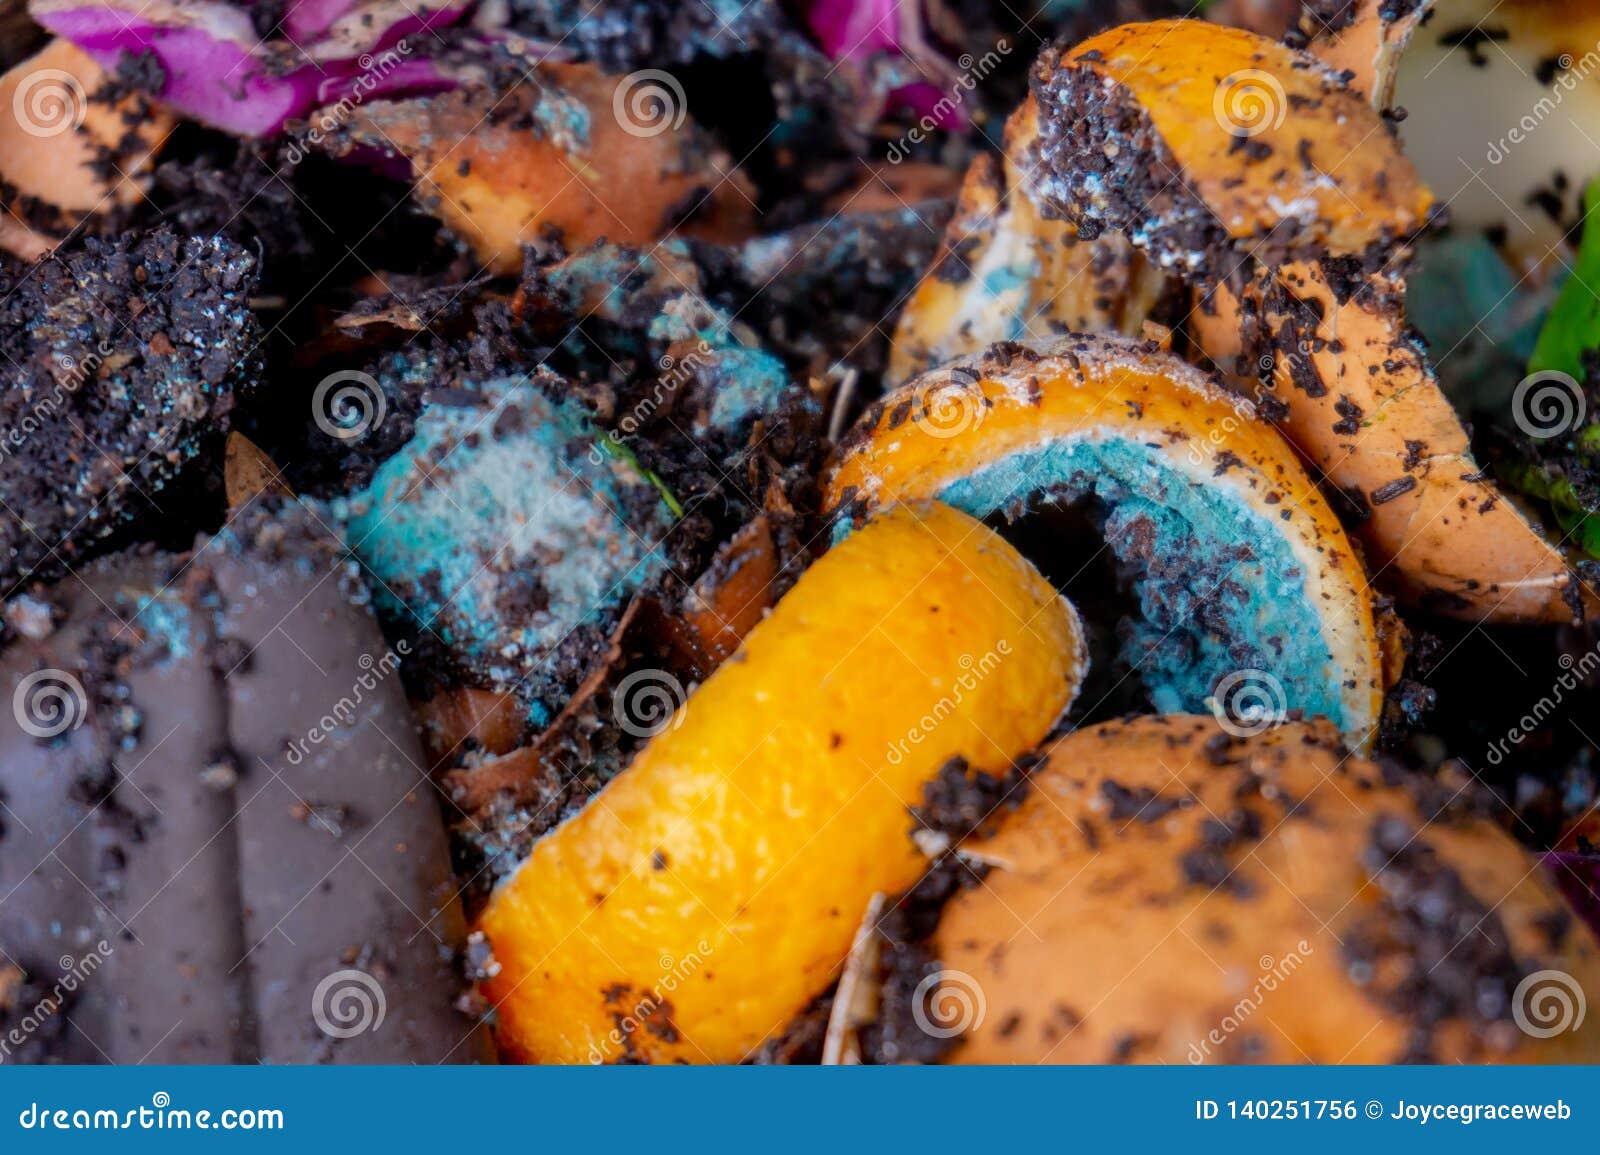 worm vermiculture compost with rotting orange peels